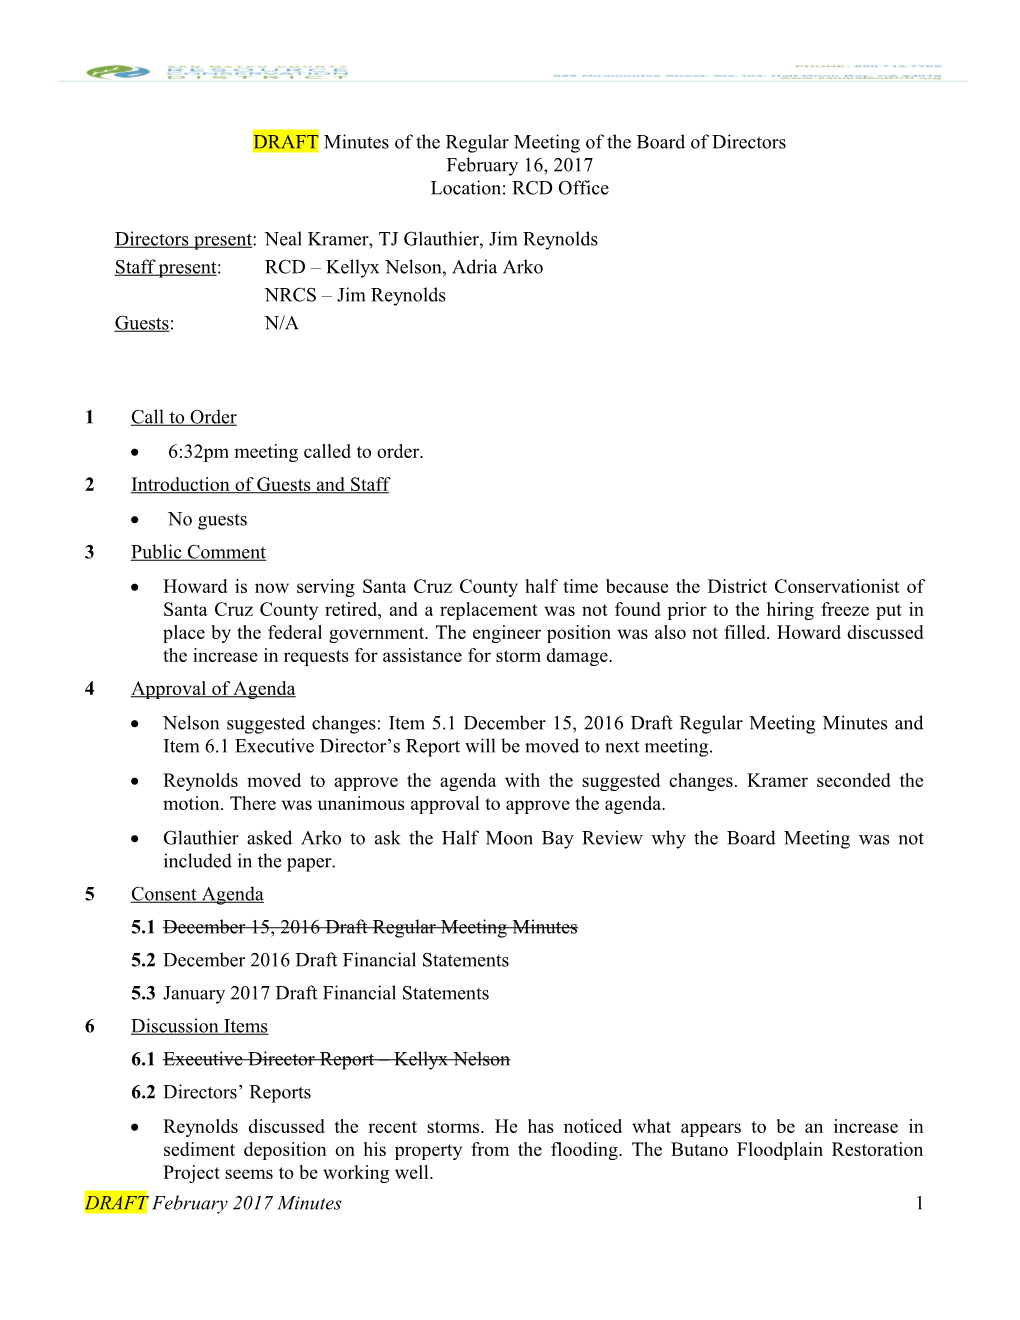 DRAFT Minutes of the Regular Meeting of the Board of Directors